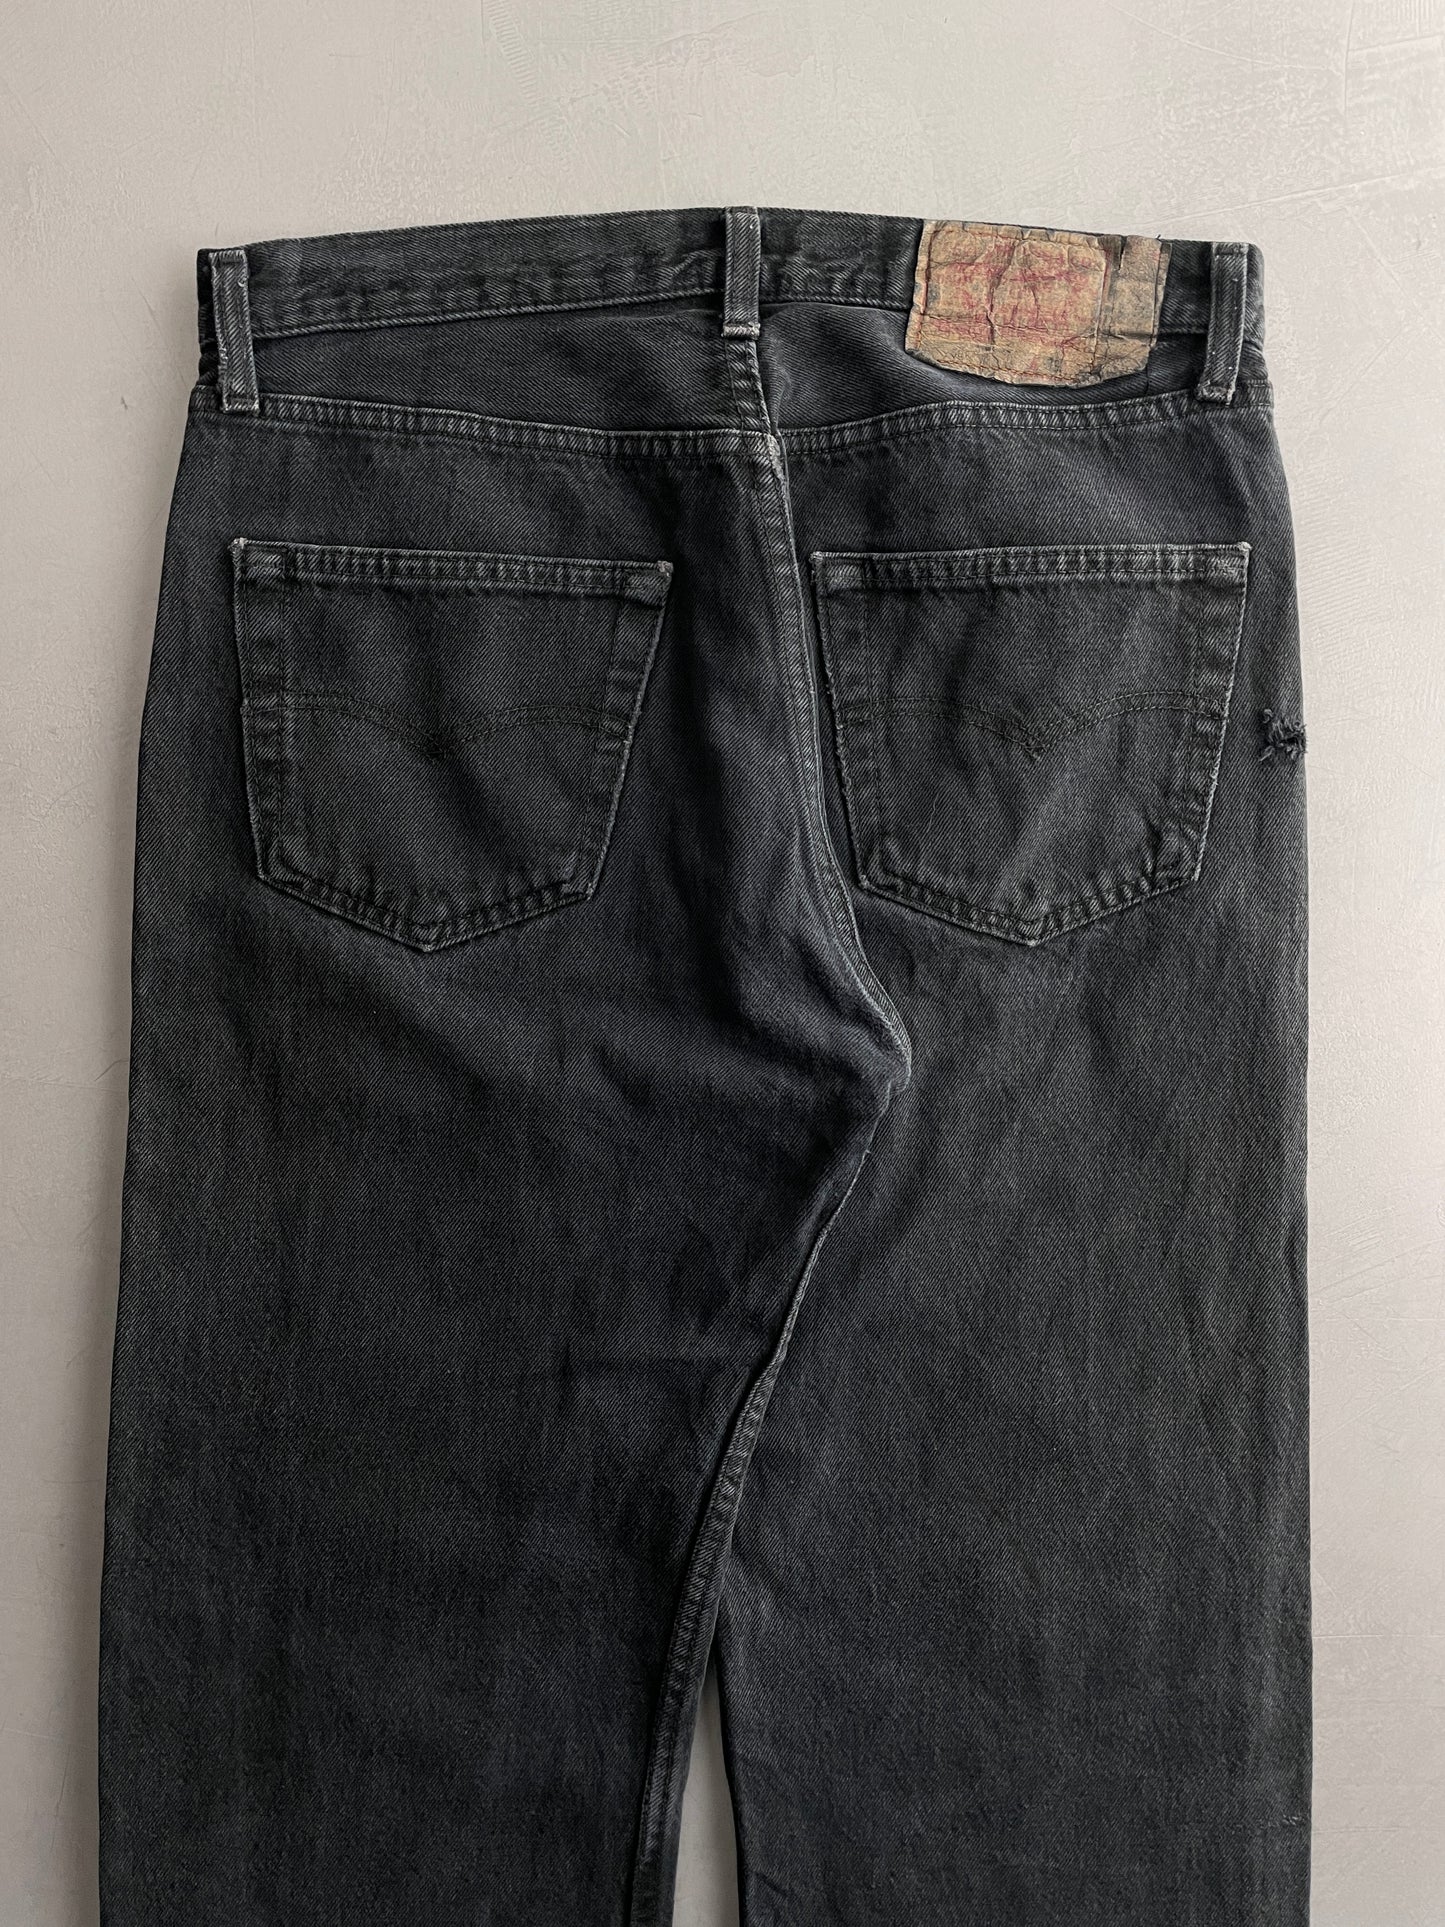 Faded Levi's 501's [32"]